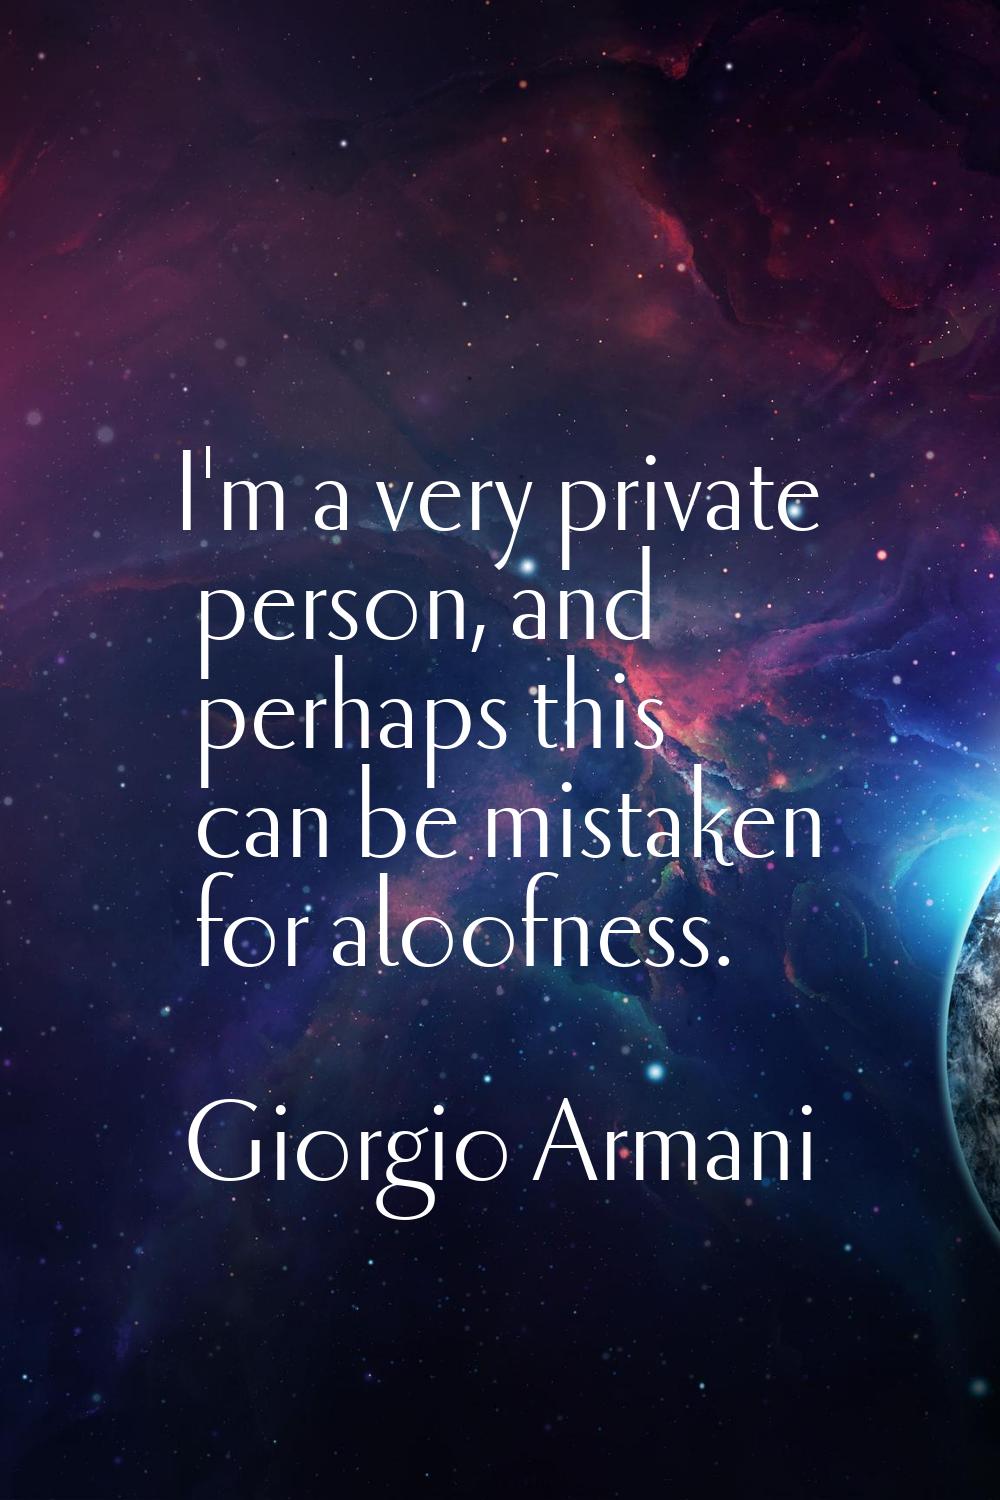 I'm a very private person, and perhaps this can be mistaken for aloofness.